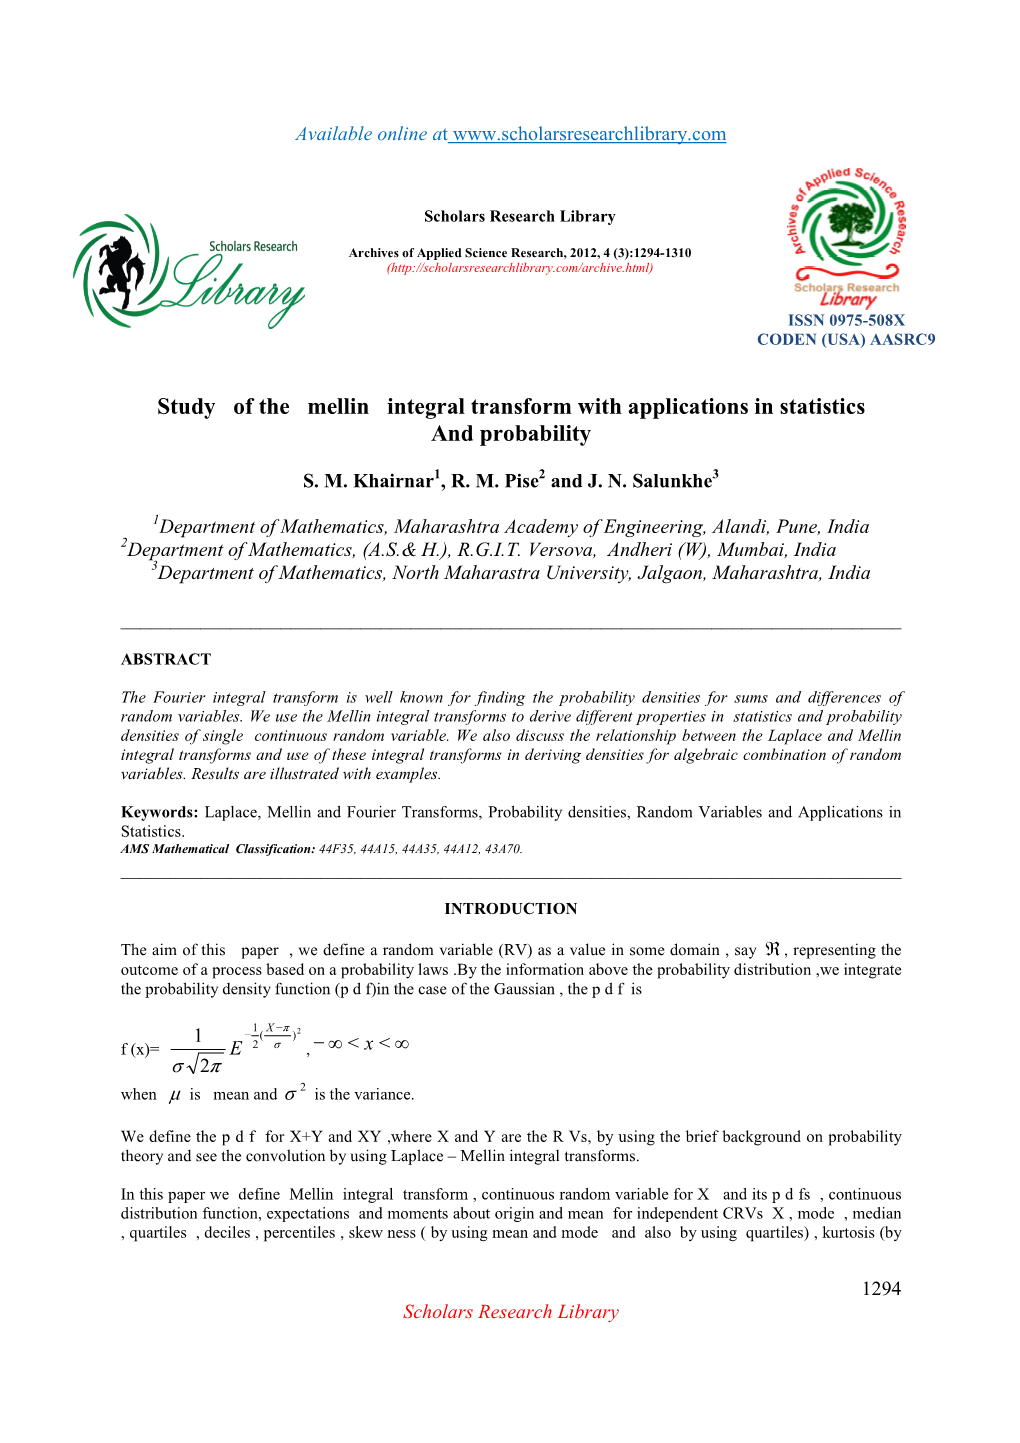 Study of the Mellin Integral Transform with Applications in Statistics and Probability